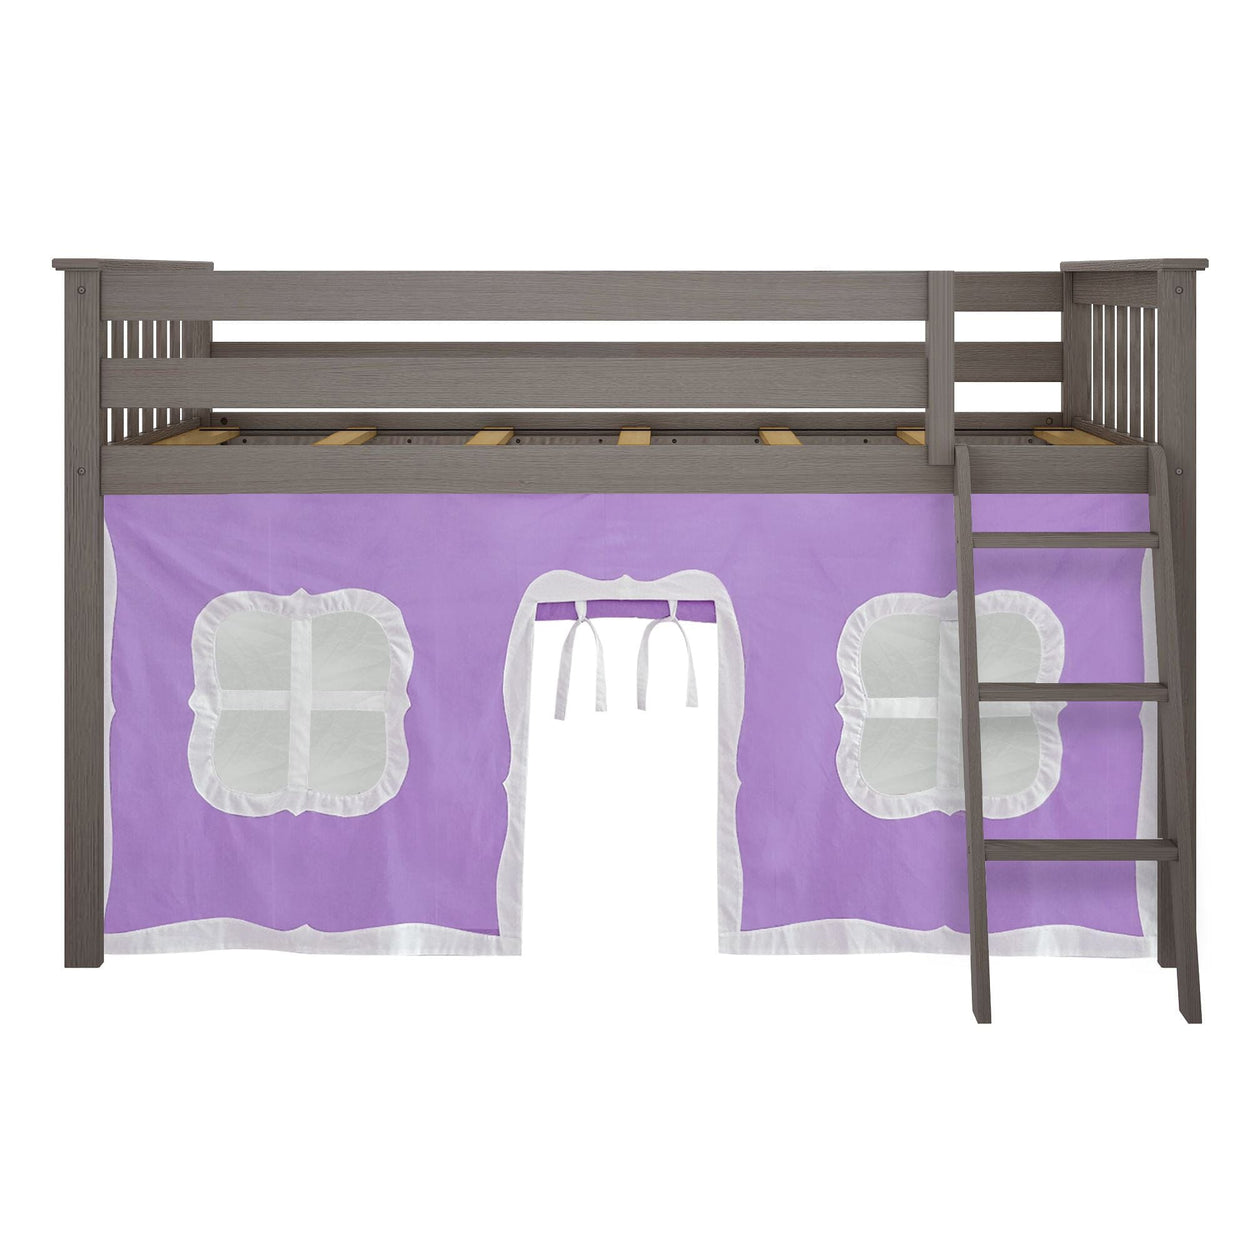 180212151061 : Loft Beds Twin-Size Low Loft With Curtain, Clay + Purple Curtain